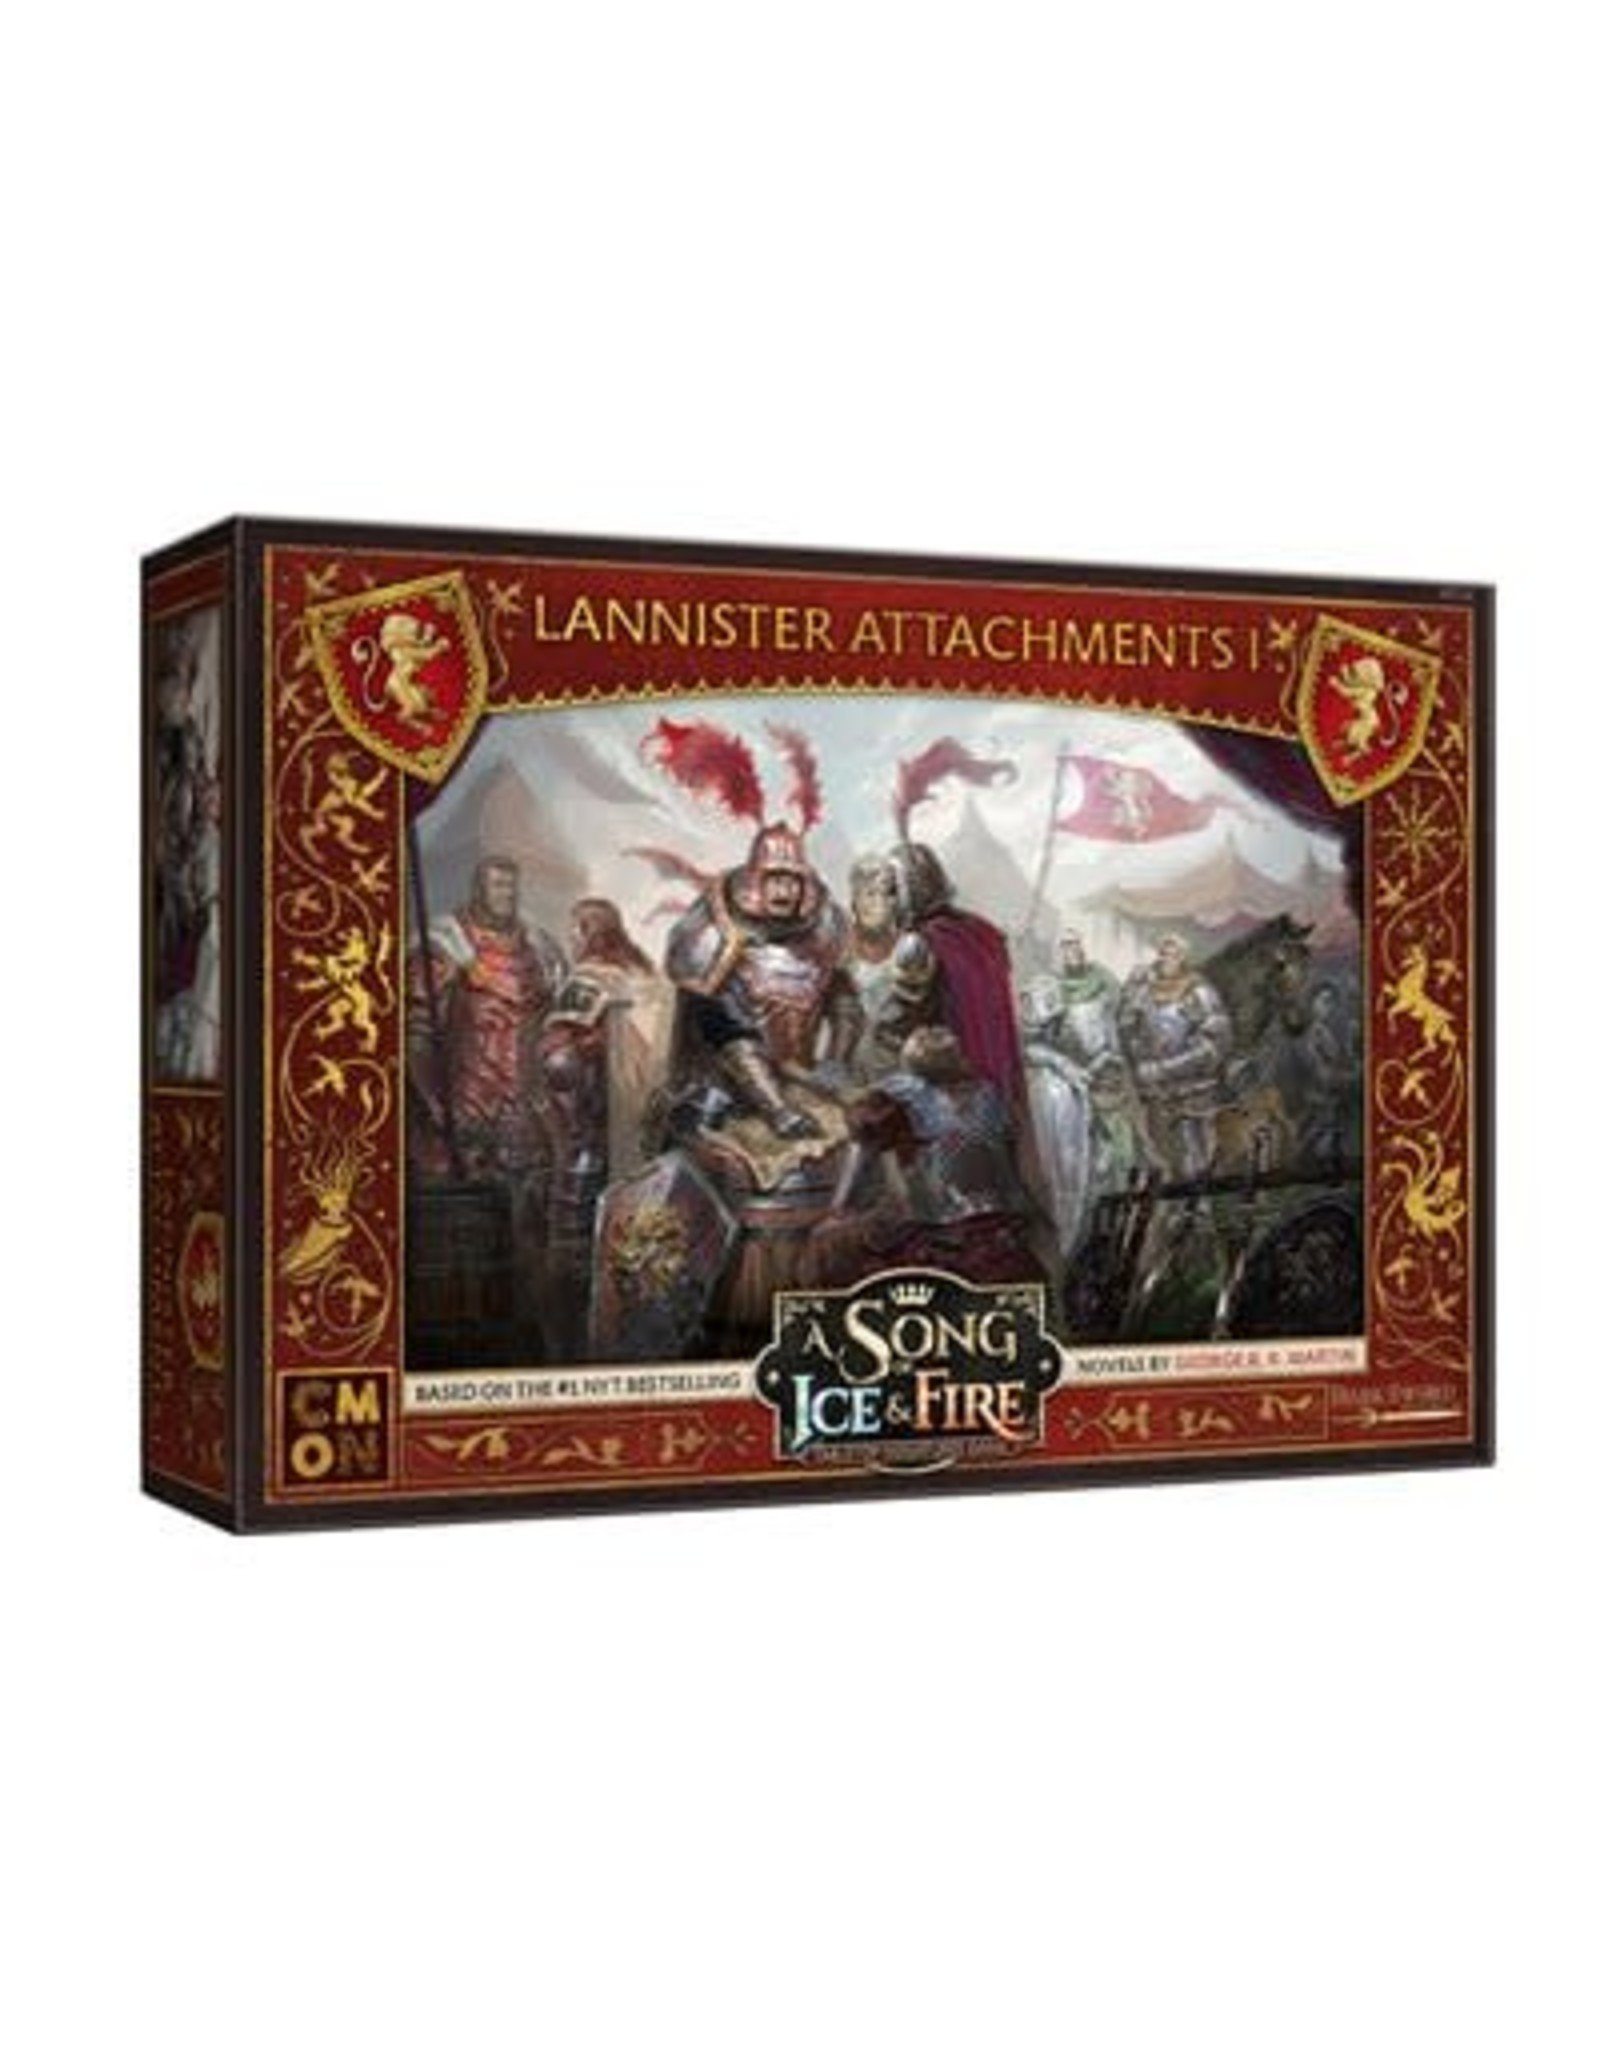 CMON A SONG OF ICE & FIRE: LANNISTER ATTACHMENT #1